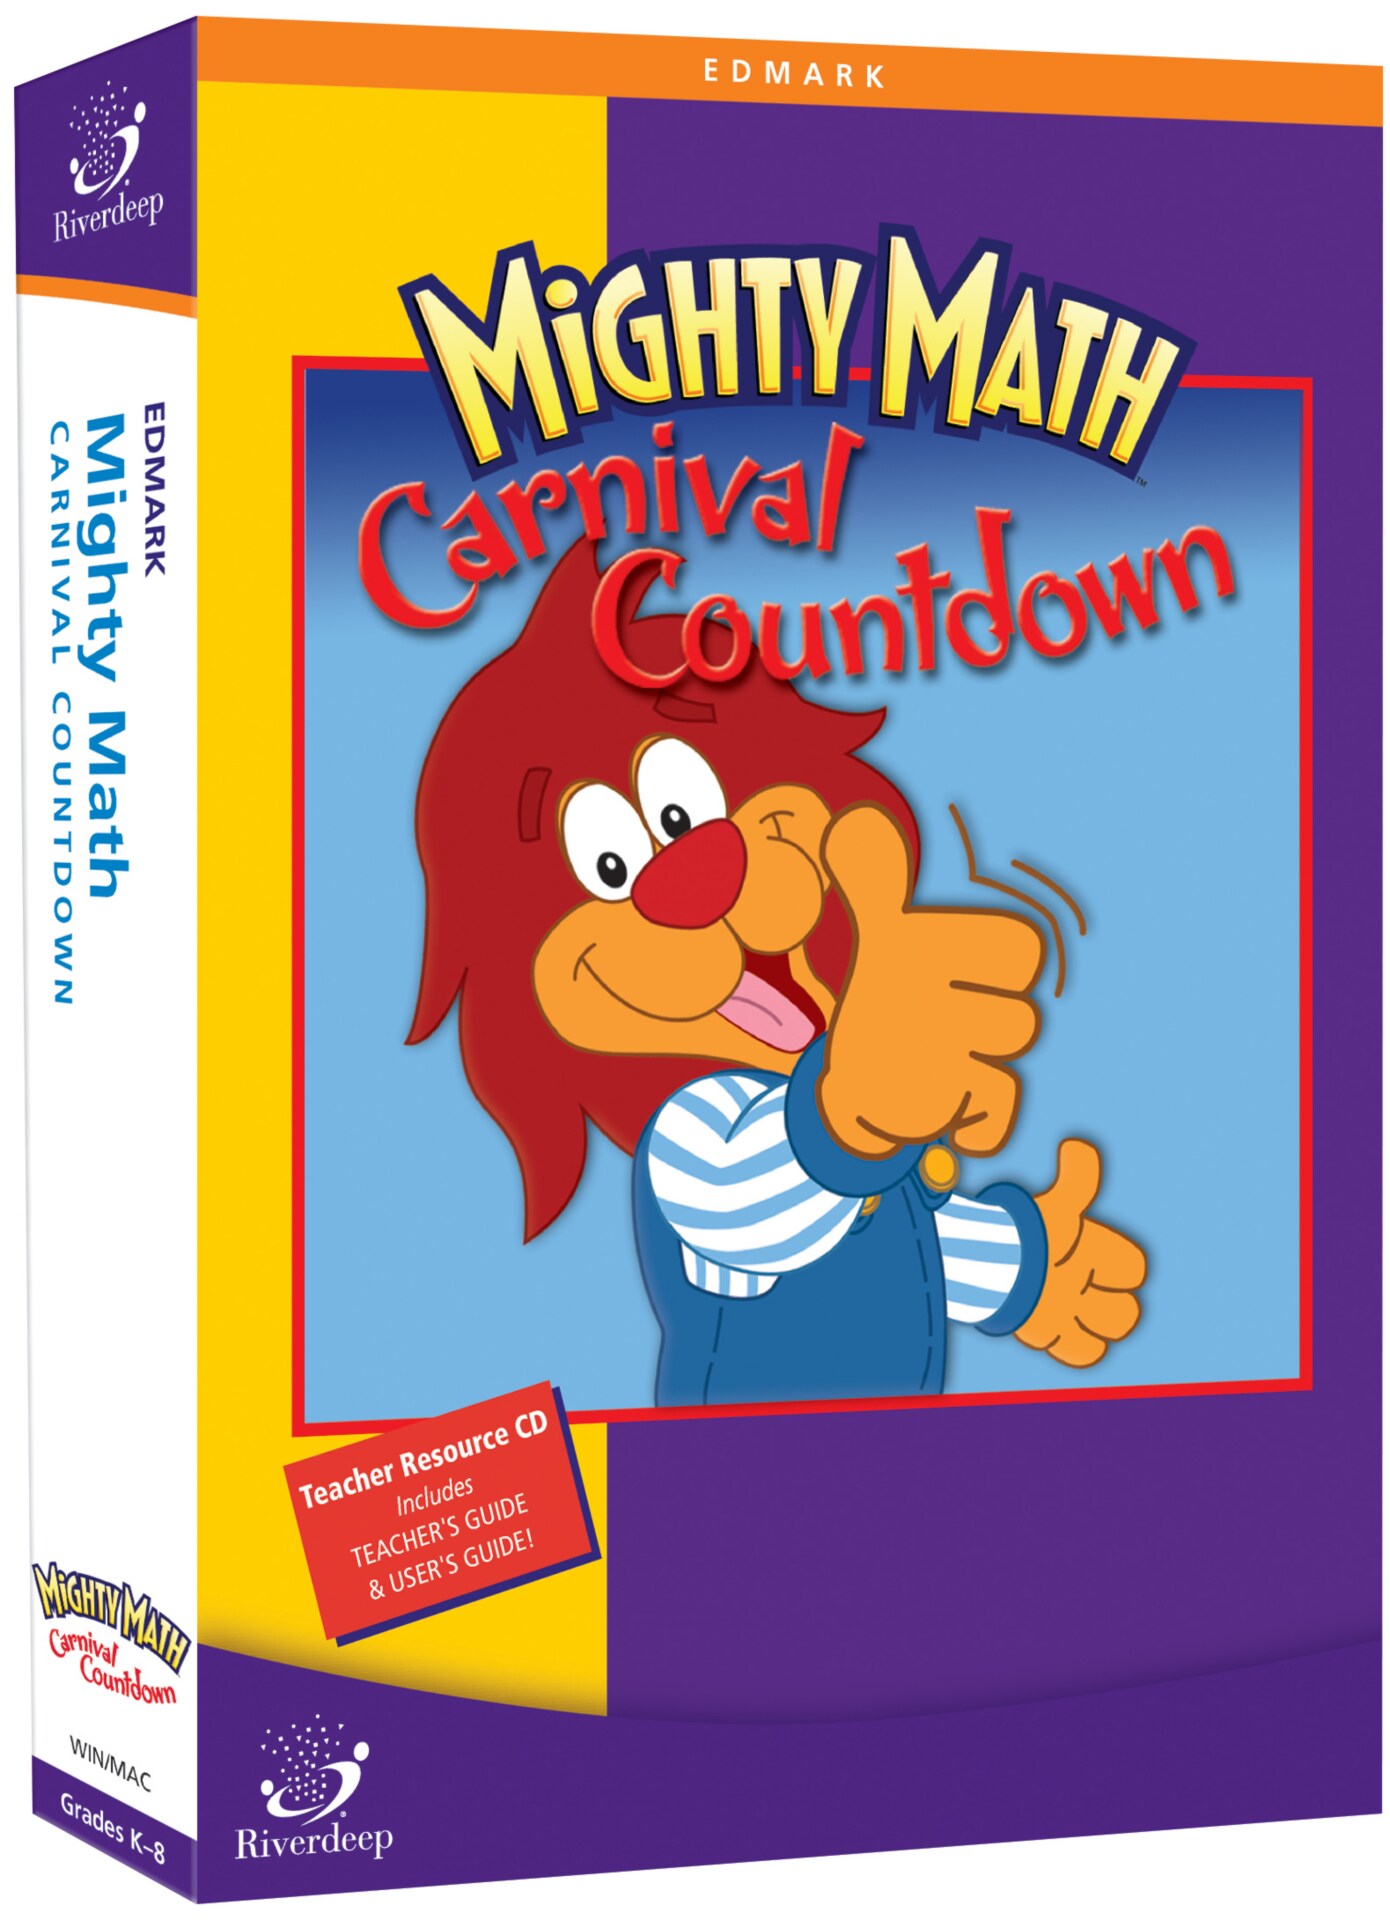 Mighty Math Carnival Countdown School Edition (v. 3.1) - license - 2 users